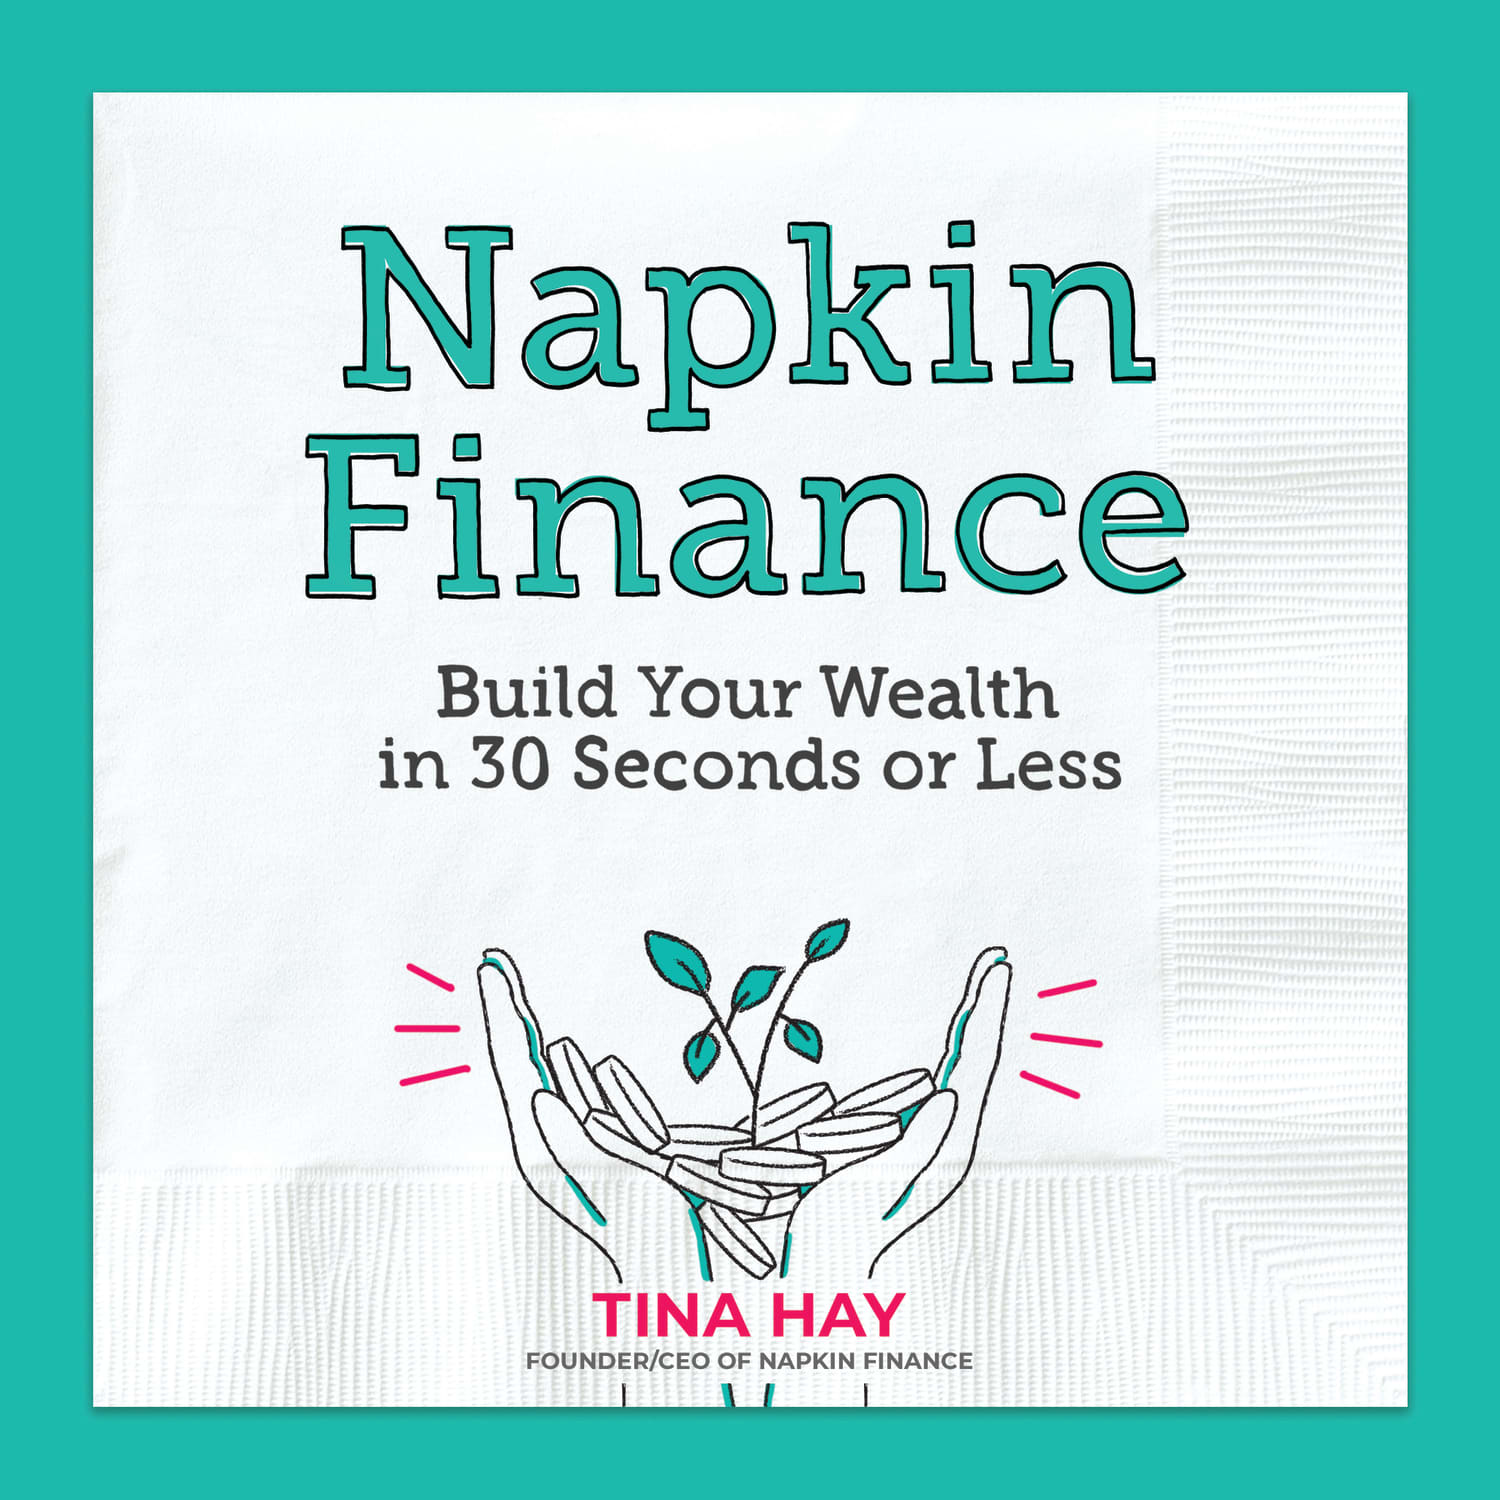 Why You Need A Budget - Napkin Finance Has Great Tips for You!